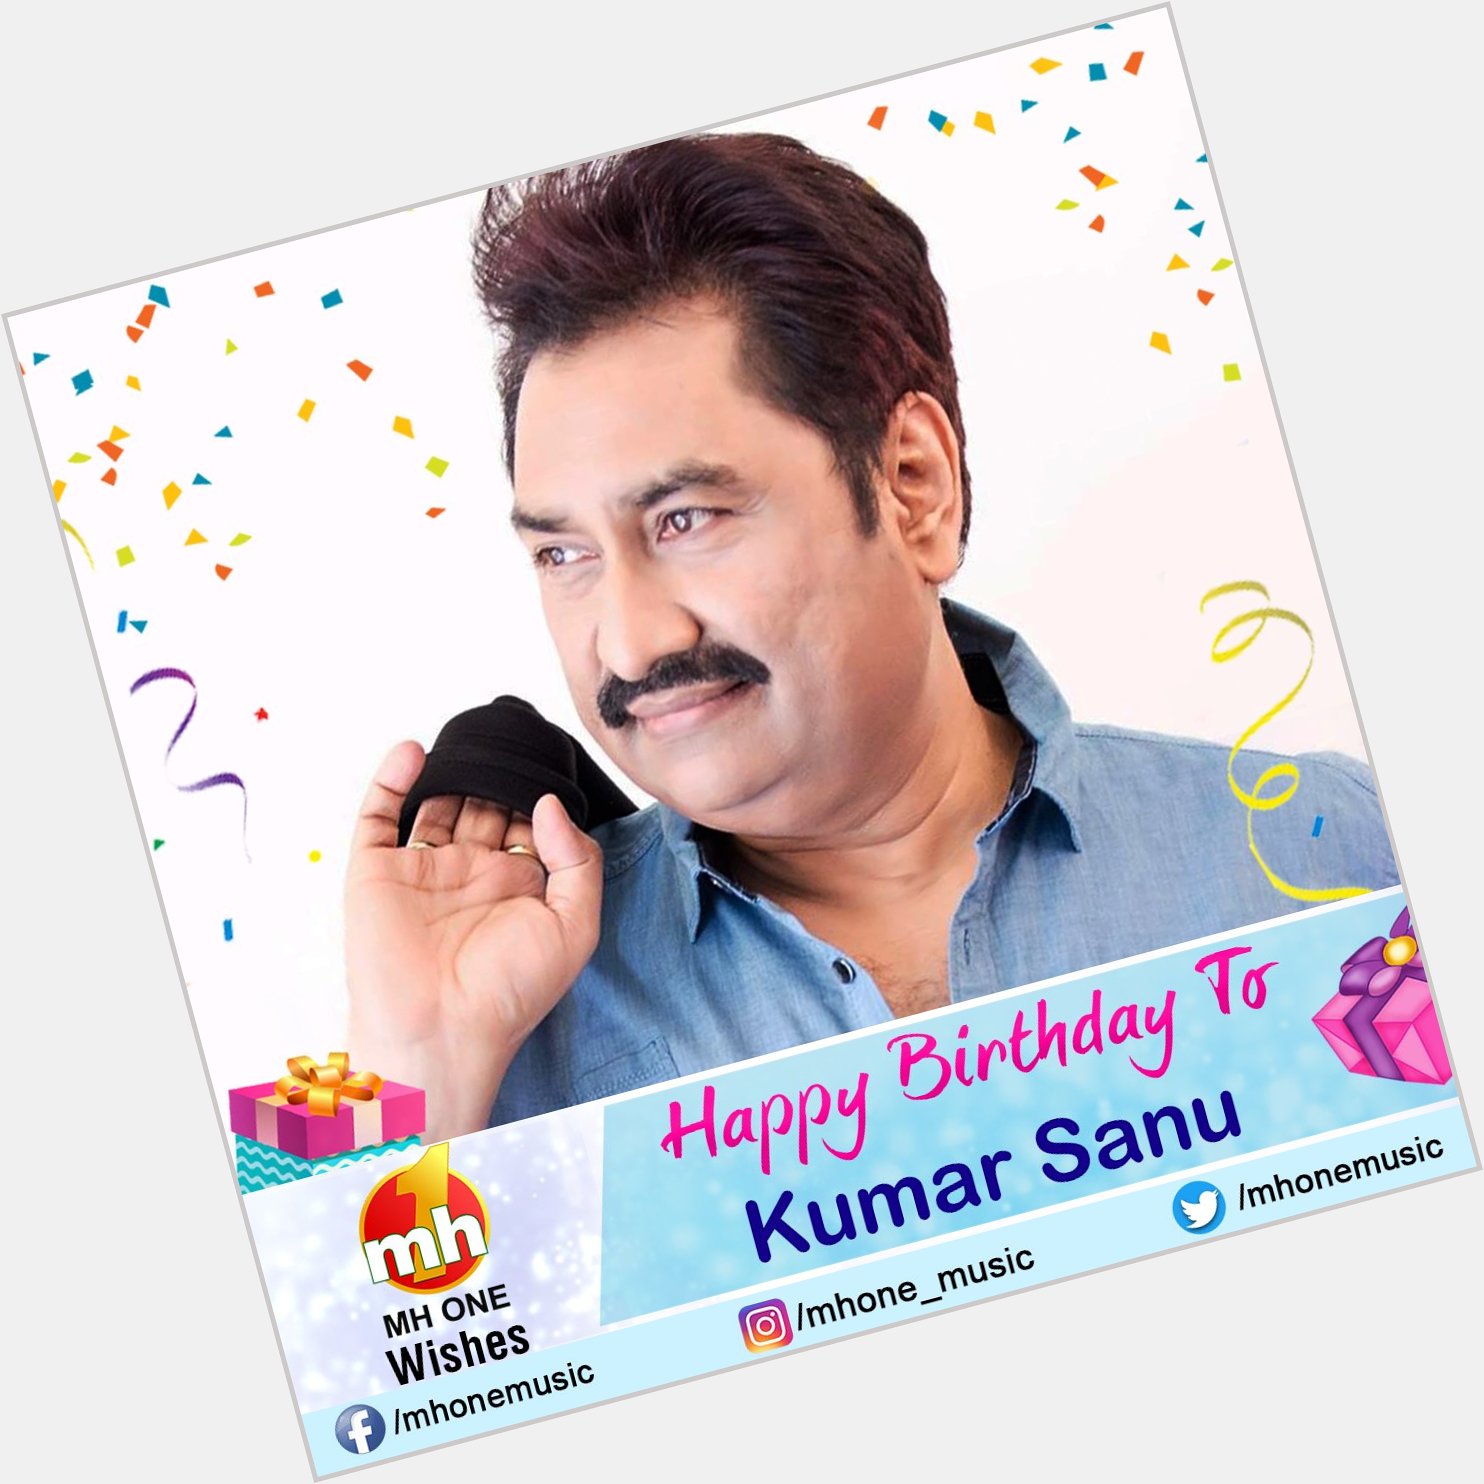 MH ONE Wishes a Very Happy Birthday to the Versatile Singer Kumar Sanu

Send him your wishes in the comments below!! 